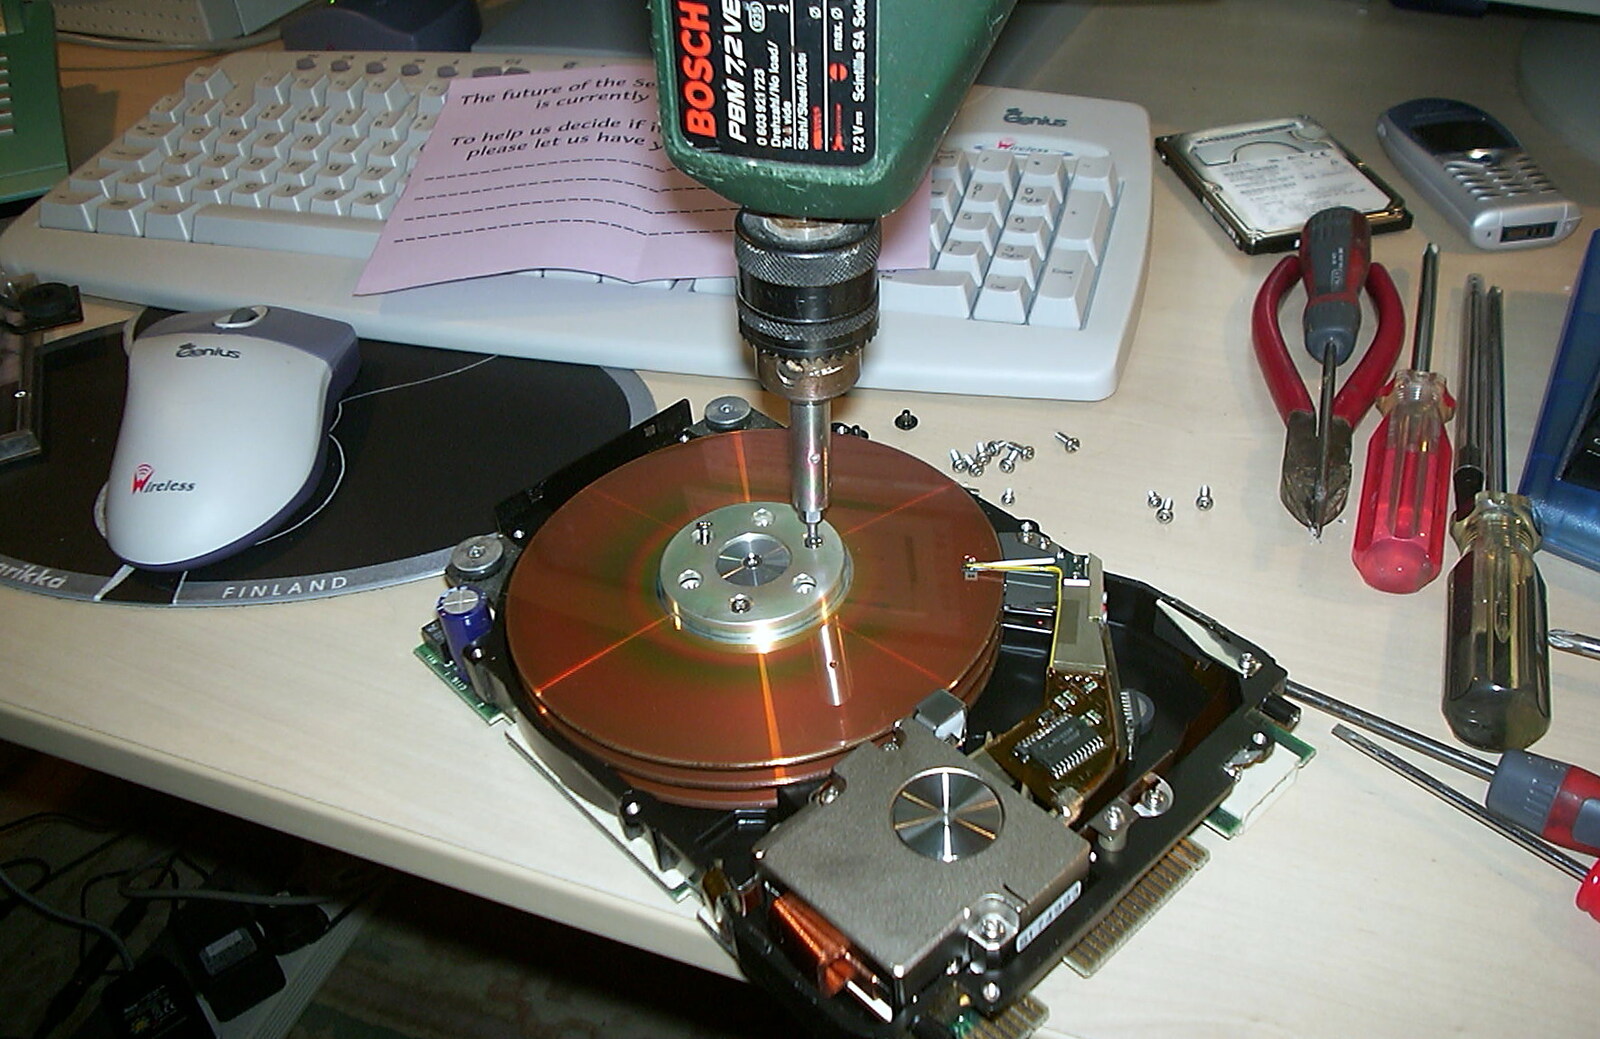 The drive platters are removed from A Hard-Drive Clock and Other Projects, Brome, Suffolk - 28th June 2002